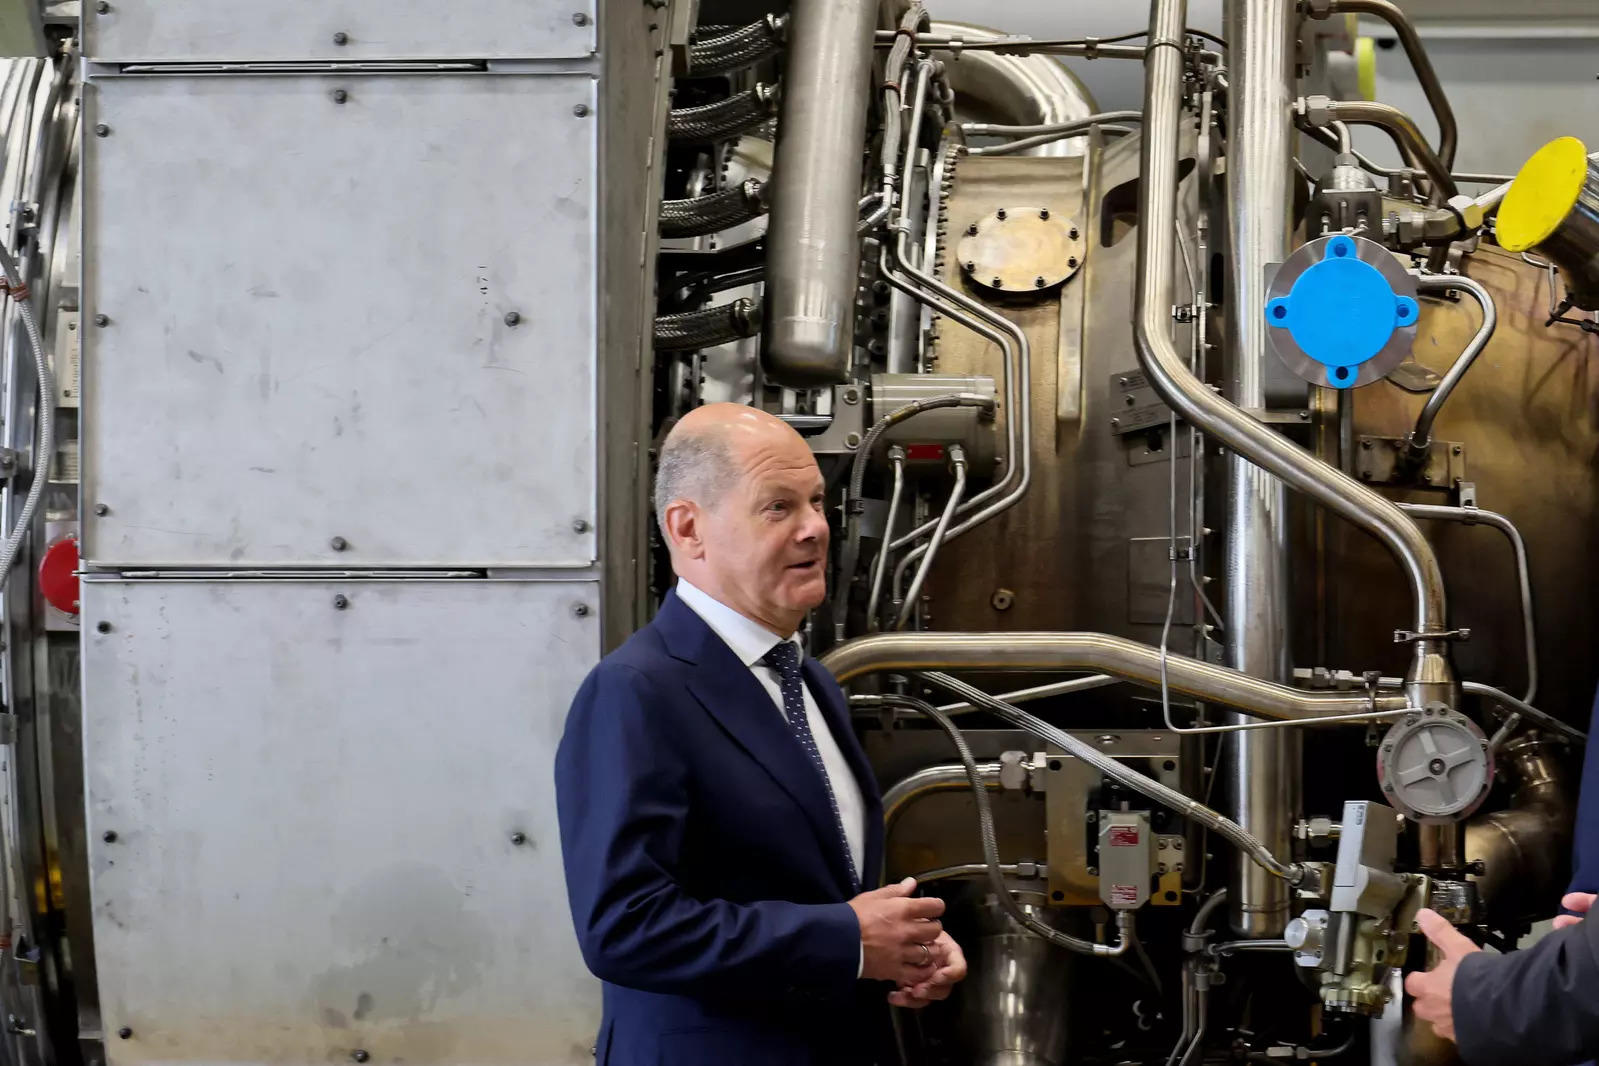 Serviced turbine for Nord Stream 1 can be delivered at any time: Scholz, ET  EnergyWorld